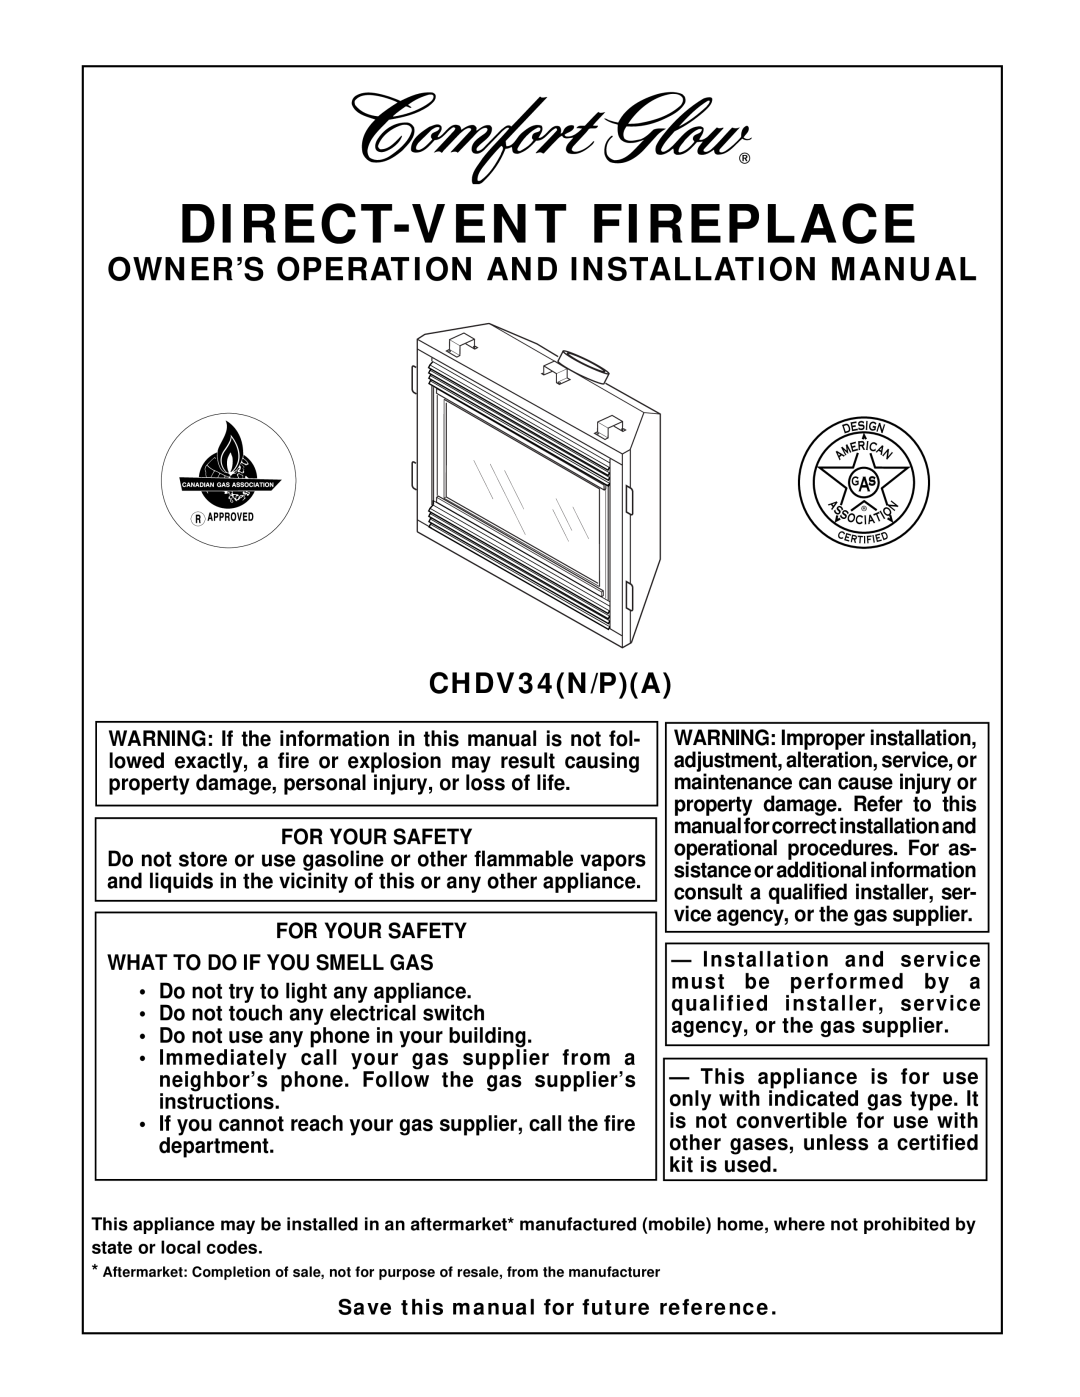 Desa CHDV34(N/P)(A) installation manual Owner’S Operation And Installation Manual, CHDV34N/PA, For Your Safety 